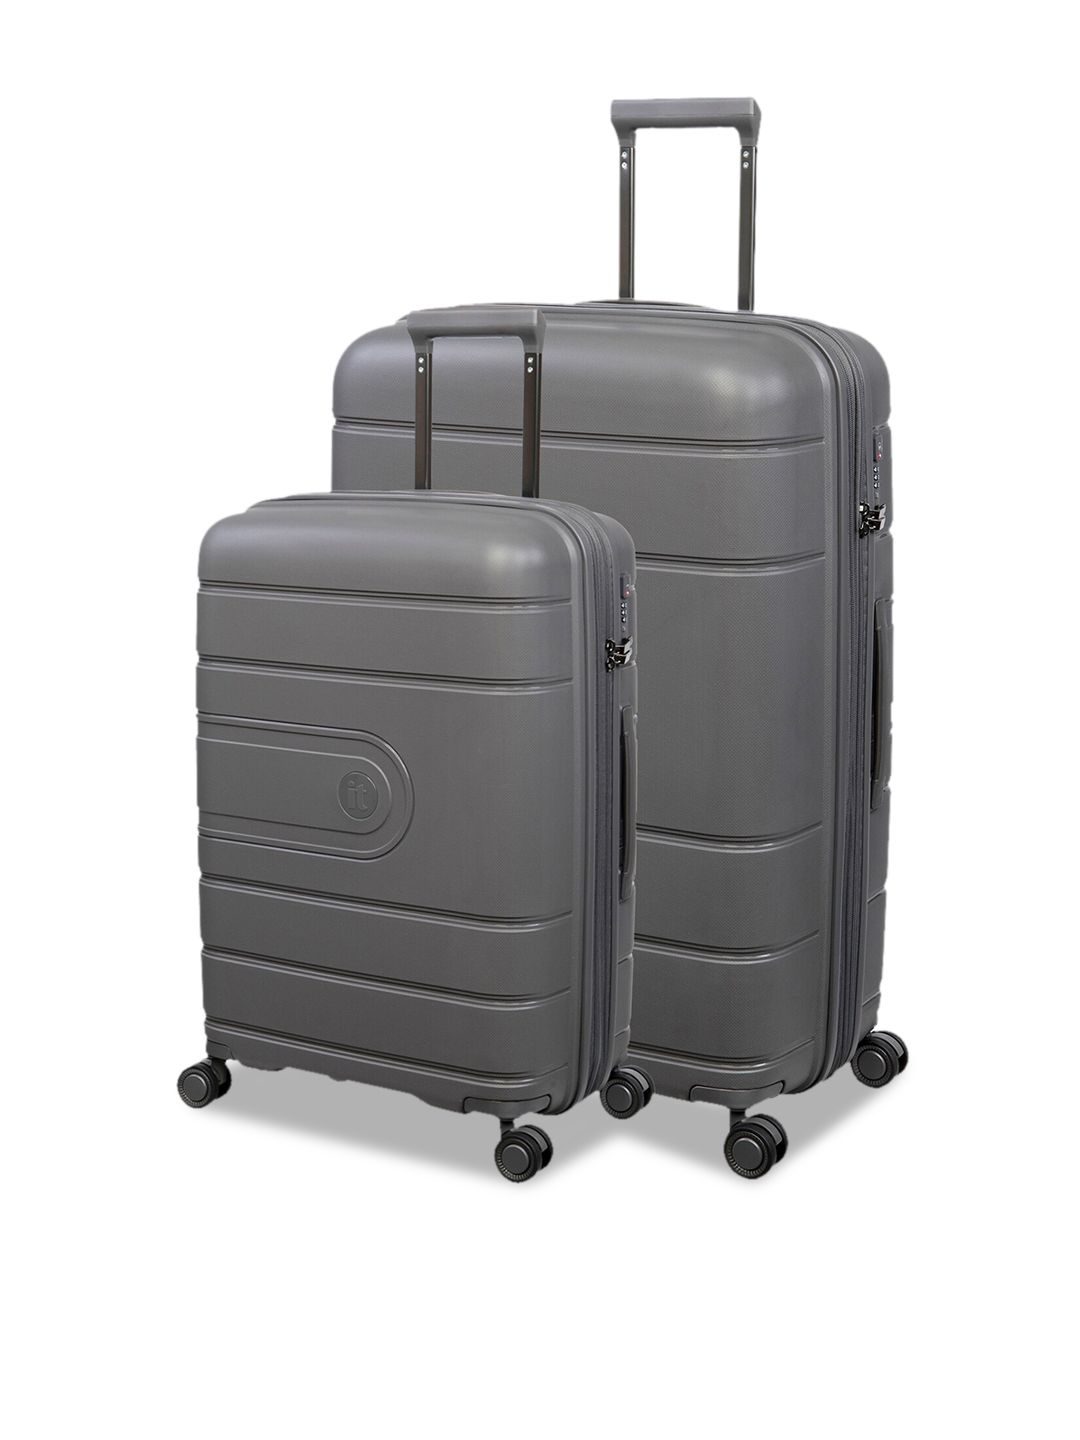 IT luggage Set Of 2 Grey Solid Hard Sided Trolley Bag Price in India